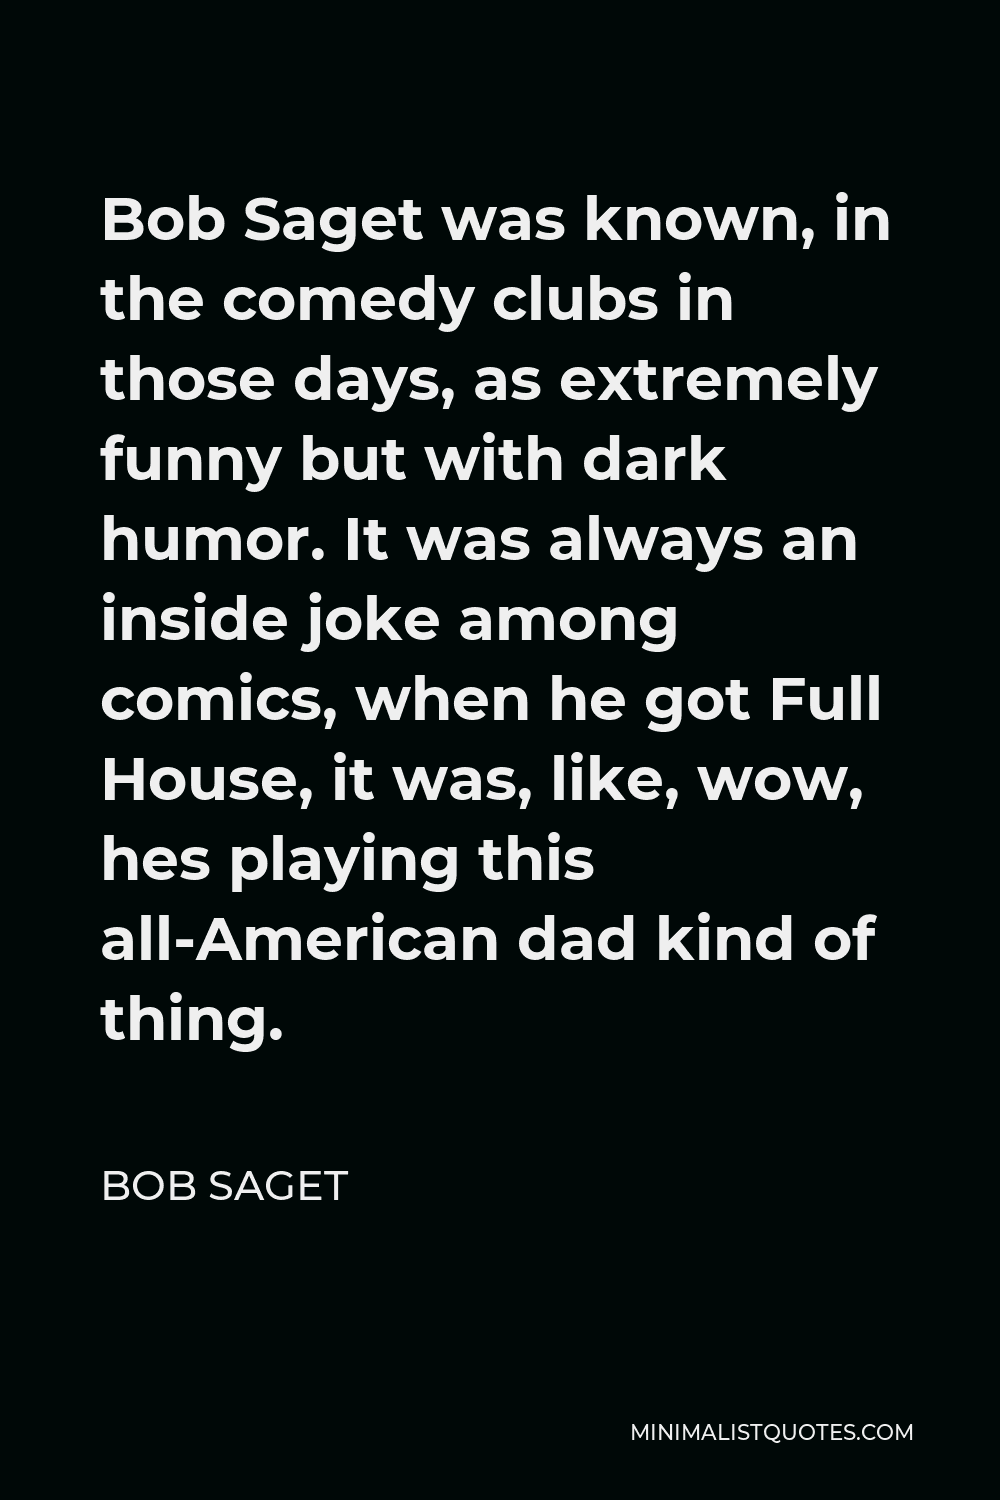 Bob Saget Quote - Bob Saget was known, in the comedy clubs in those days, as extremely funny but with dark humor. It was always an inside joke among comics, when he got Full House, it was, like, wow, hes playing this all-American dad kind of thing.